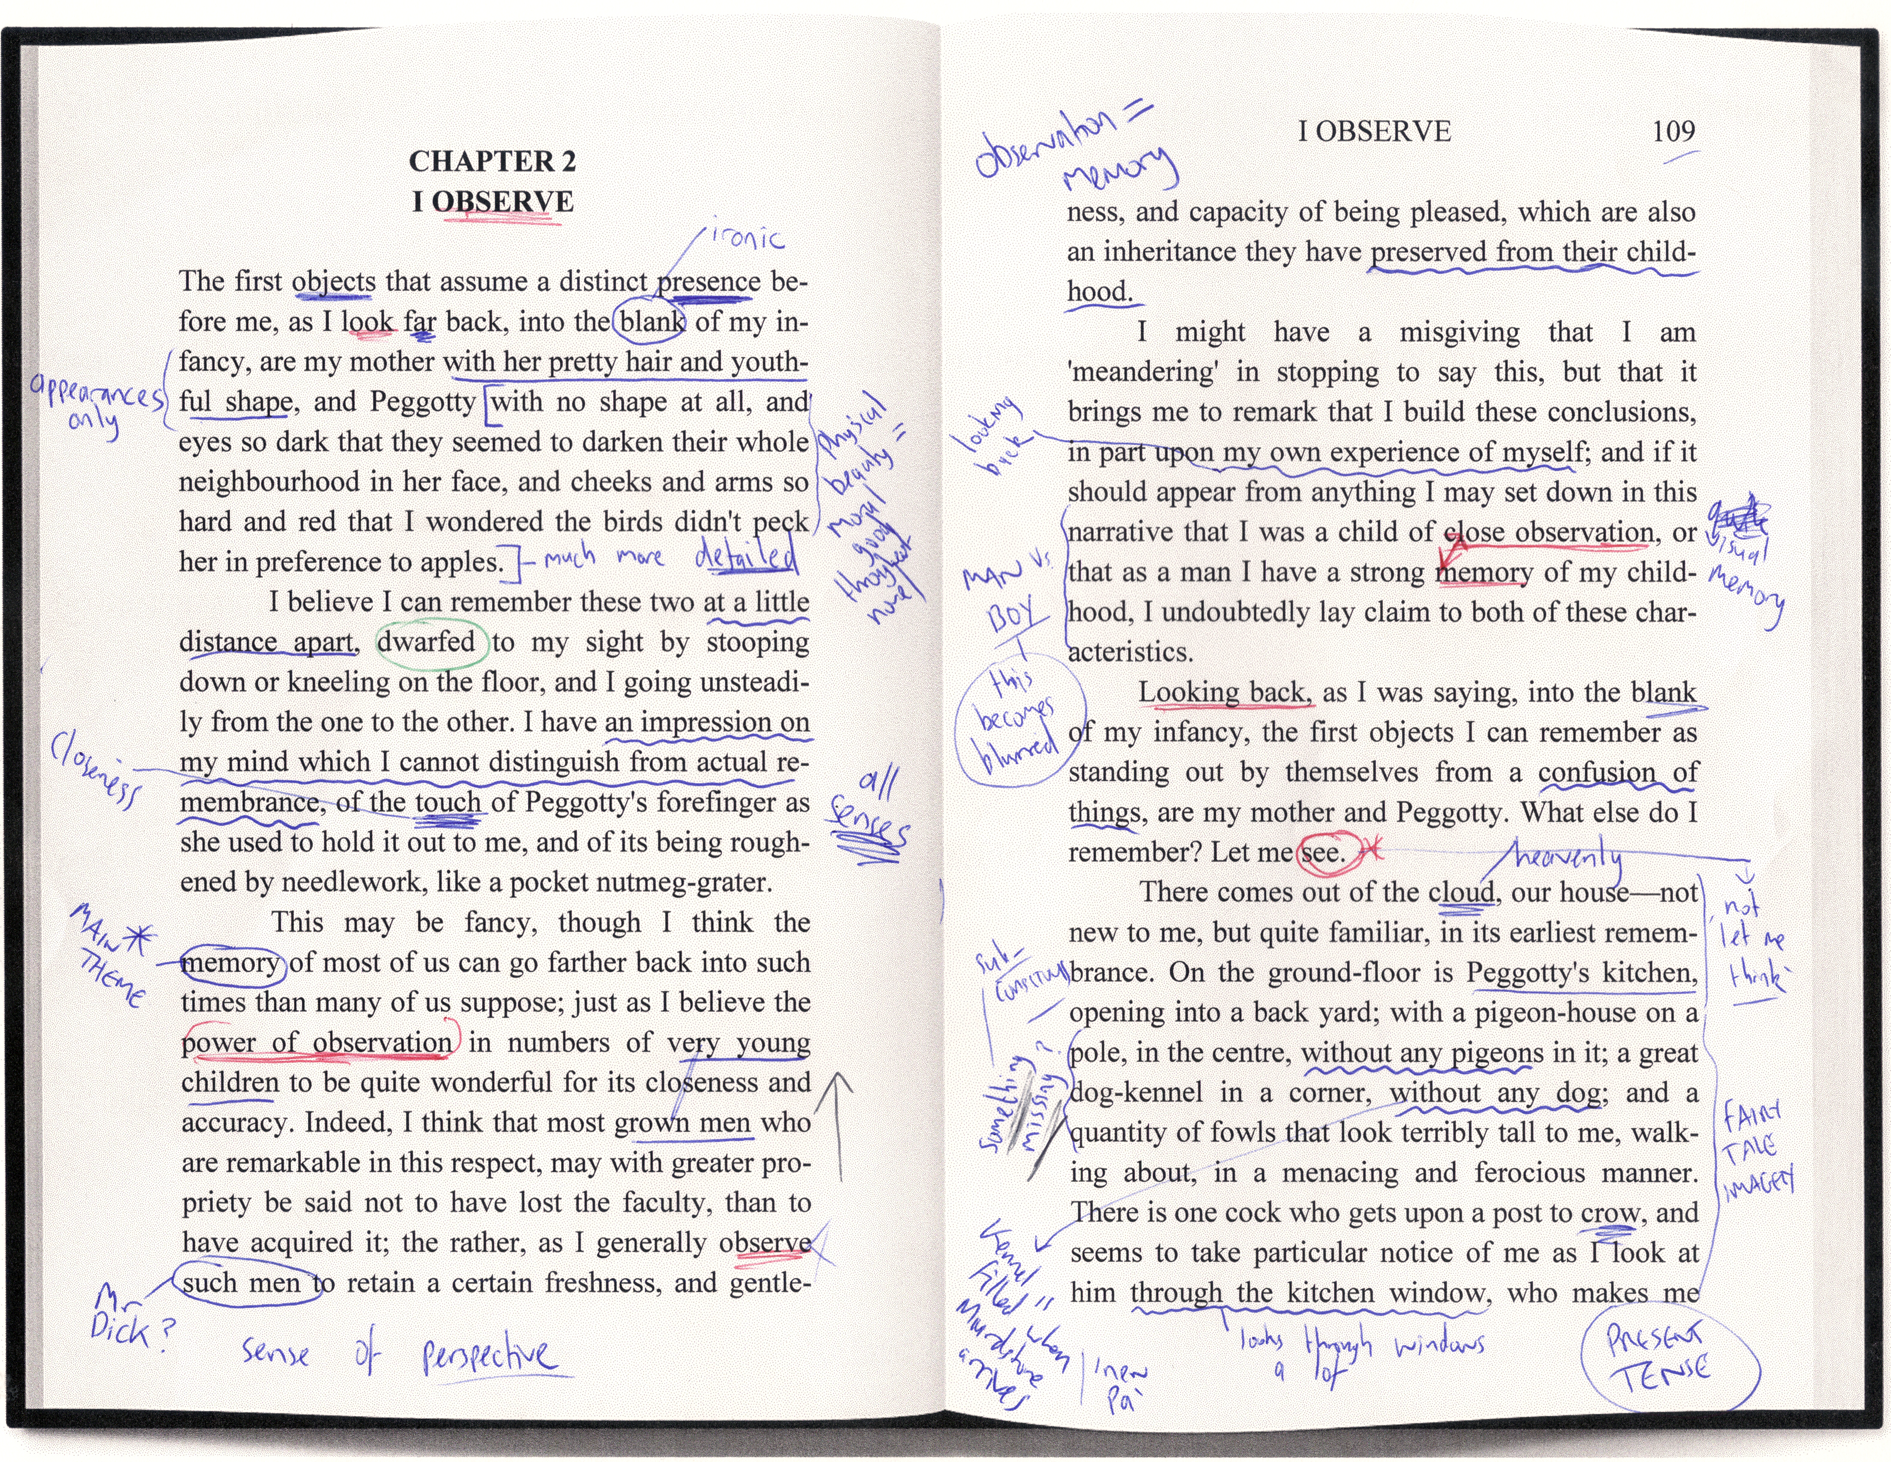 Figure 1: Manual annotation of a text